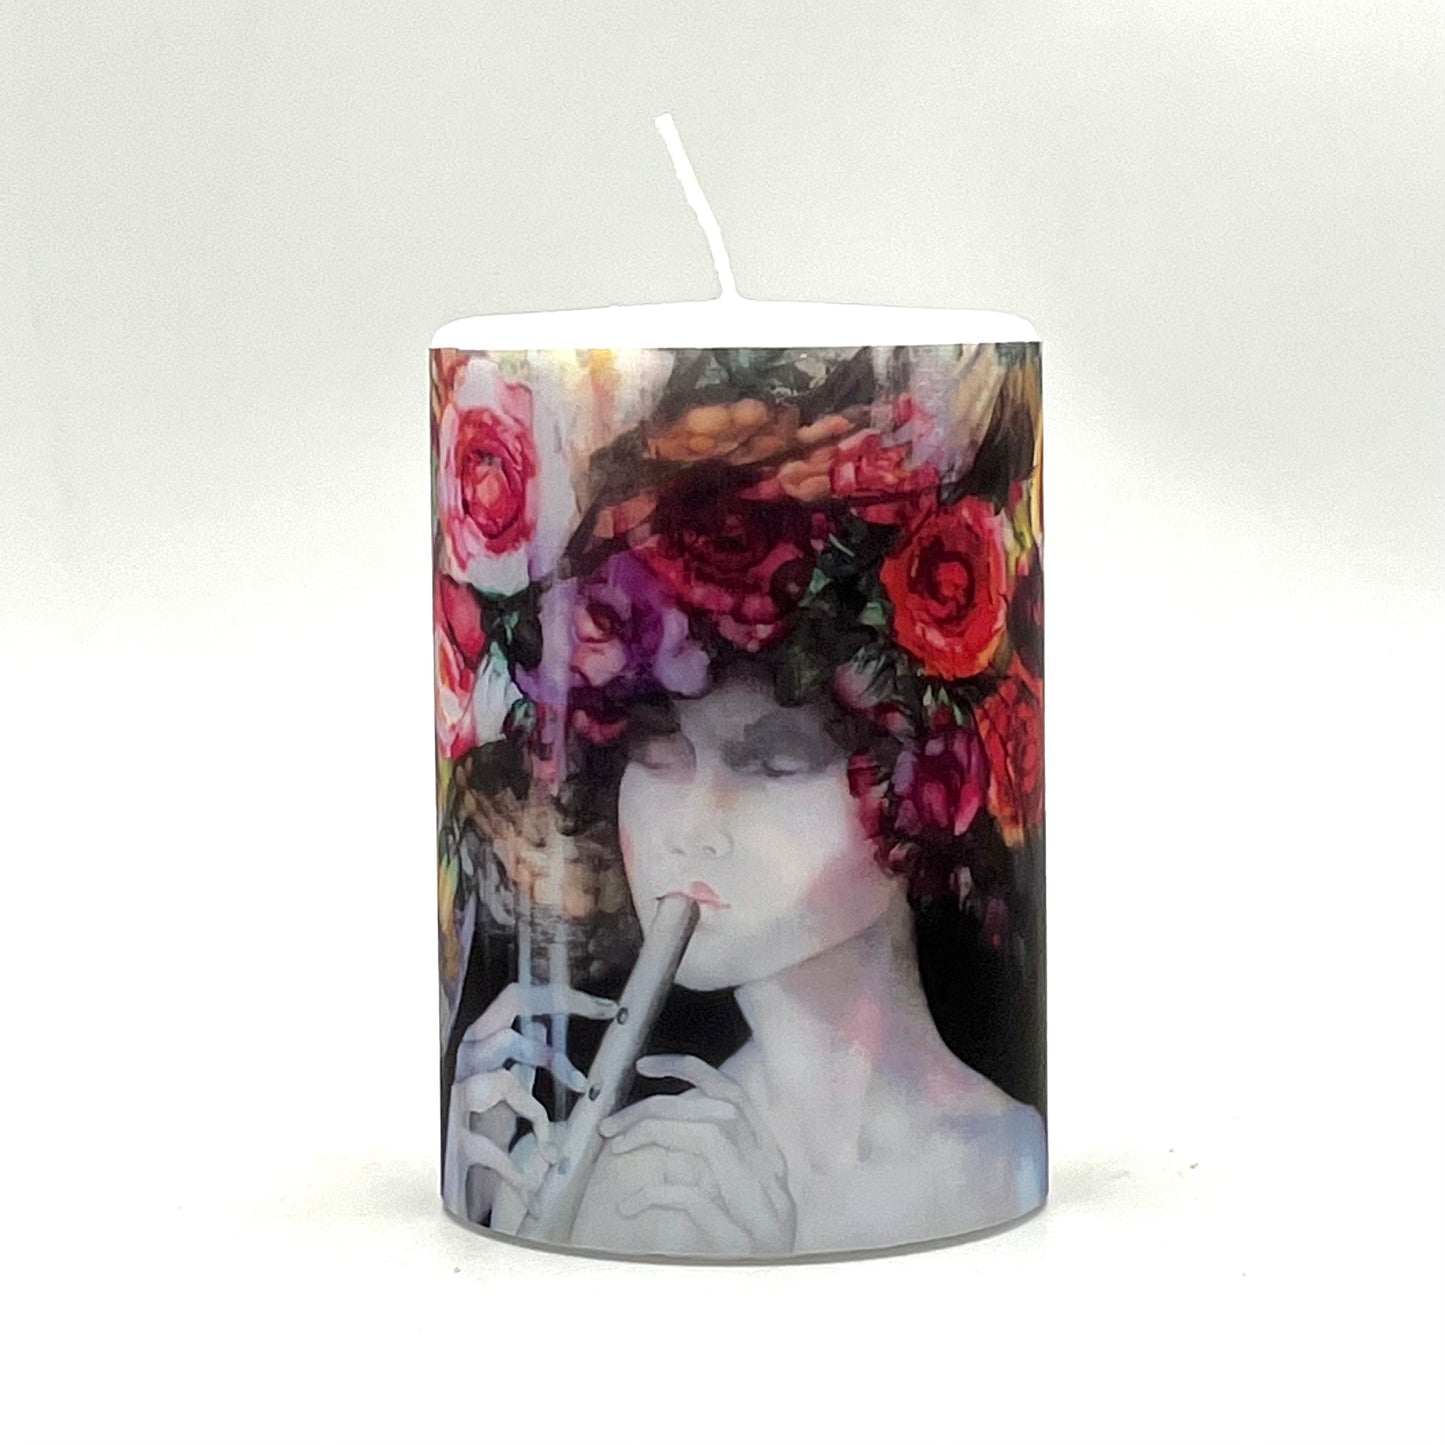 Design candle with the painting "Strengthened", 2019.